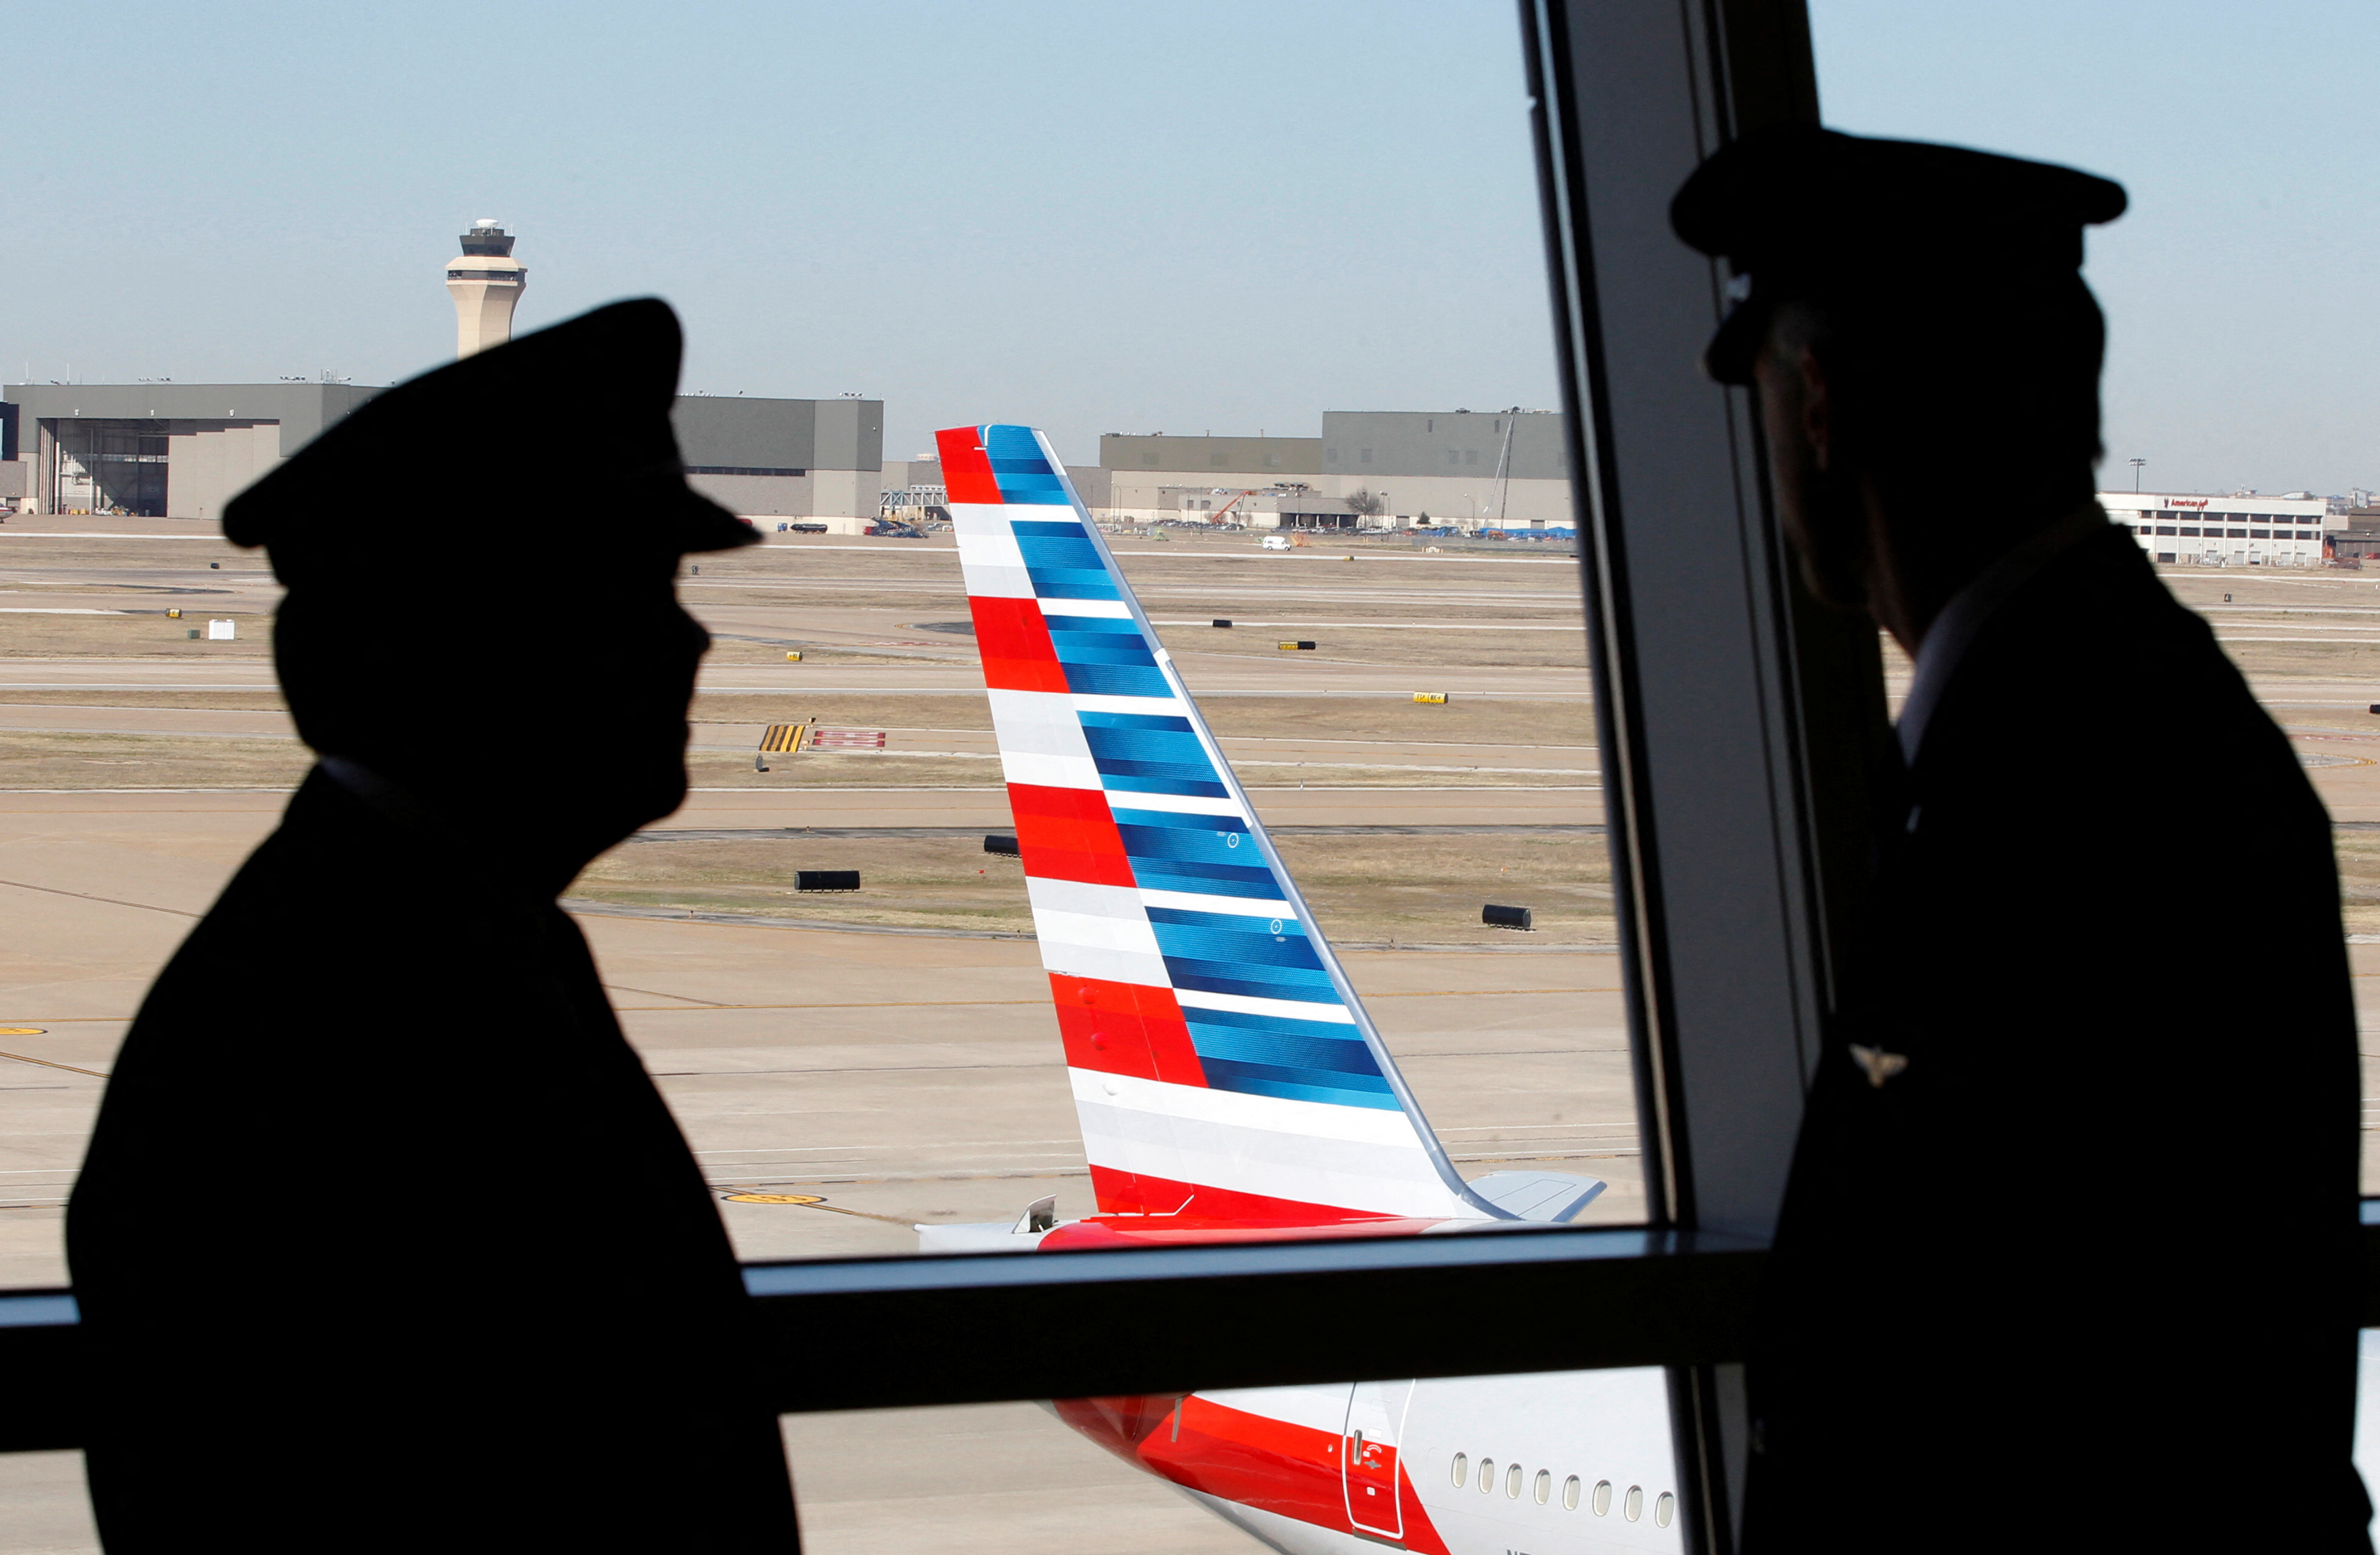 Pilots talk as they look at the tail of an American Airlines aircraft at Dallas-Ft Worth International Airport